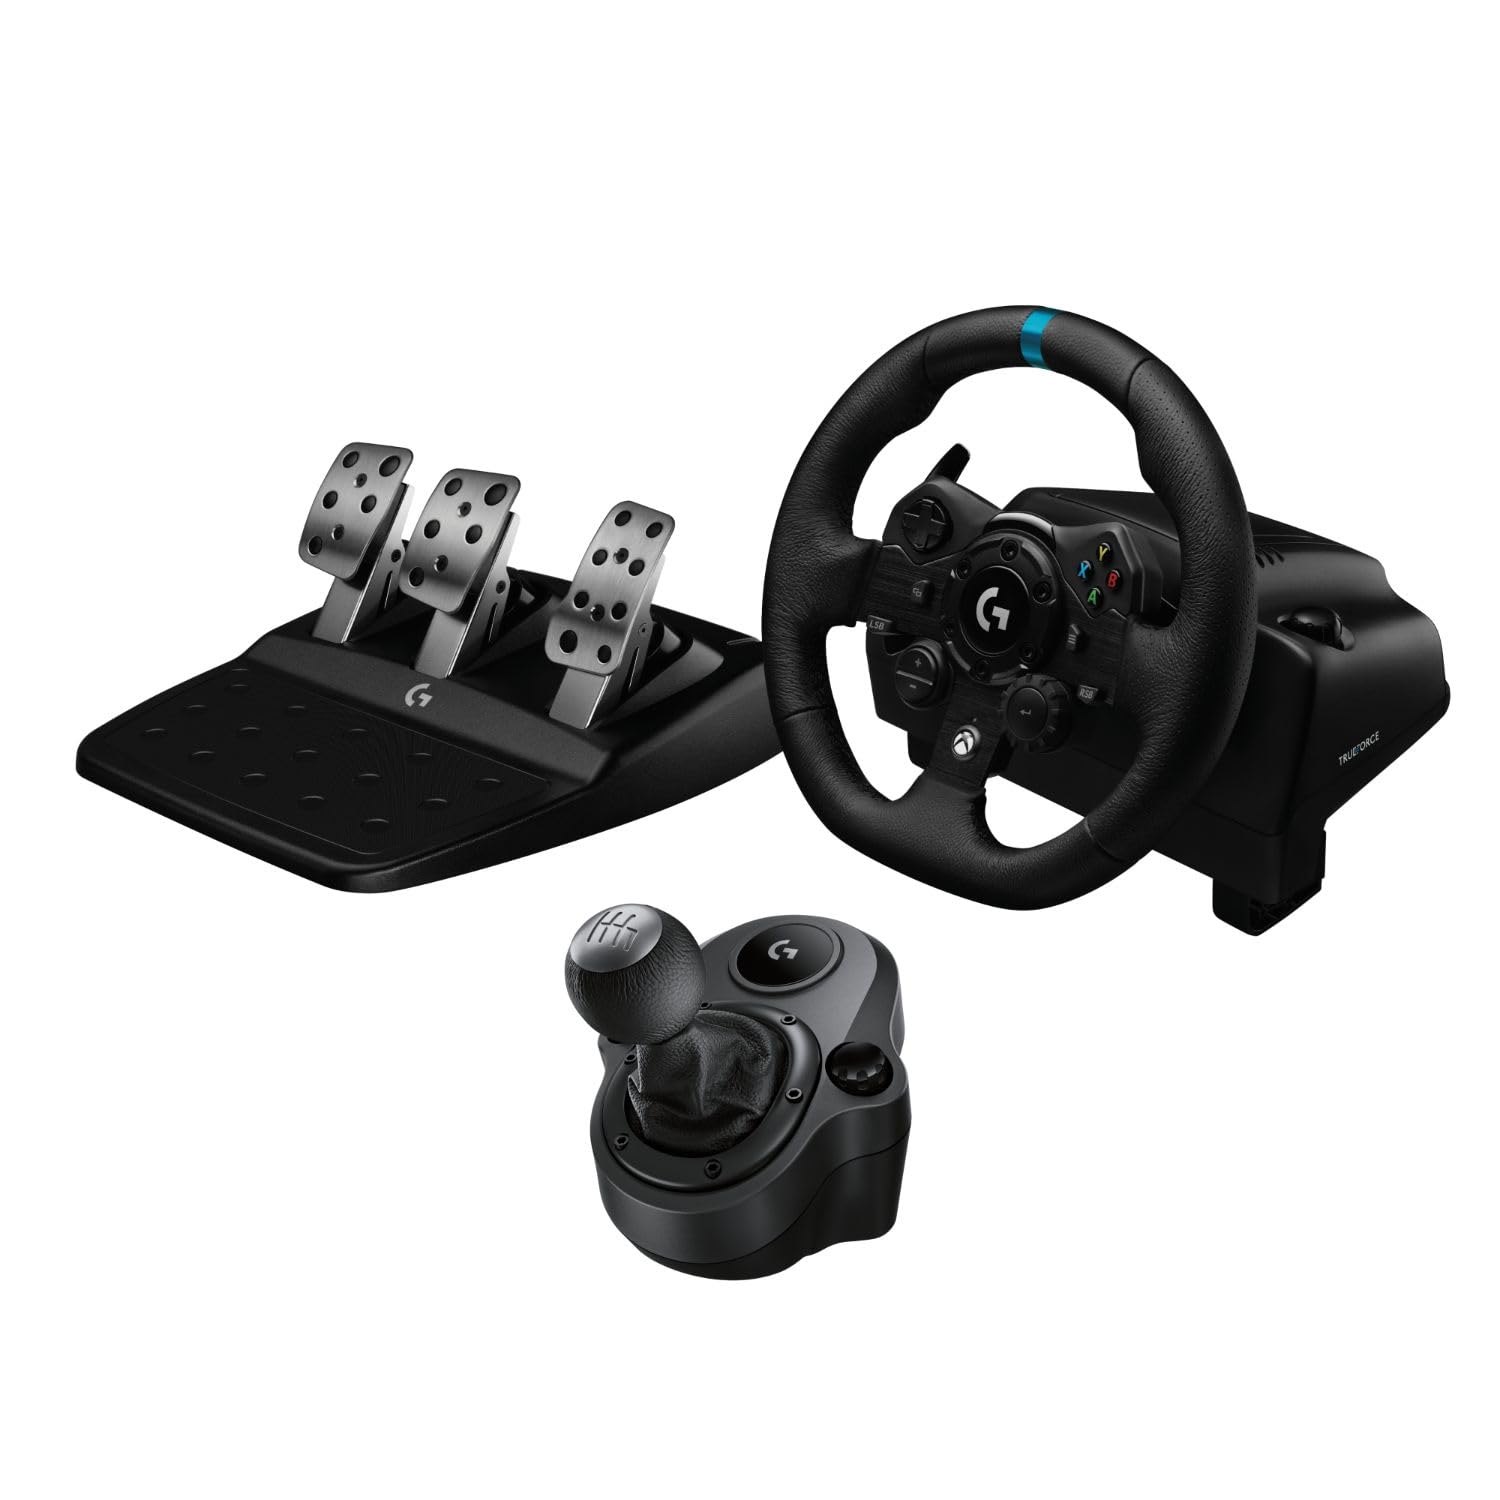 Logitech G Driving Force Shifter with Logitech G923 Racing Wheel and Pedals for Xbox X|S, Xbox One and PC and Genuine Leather Wheel Cover